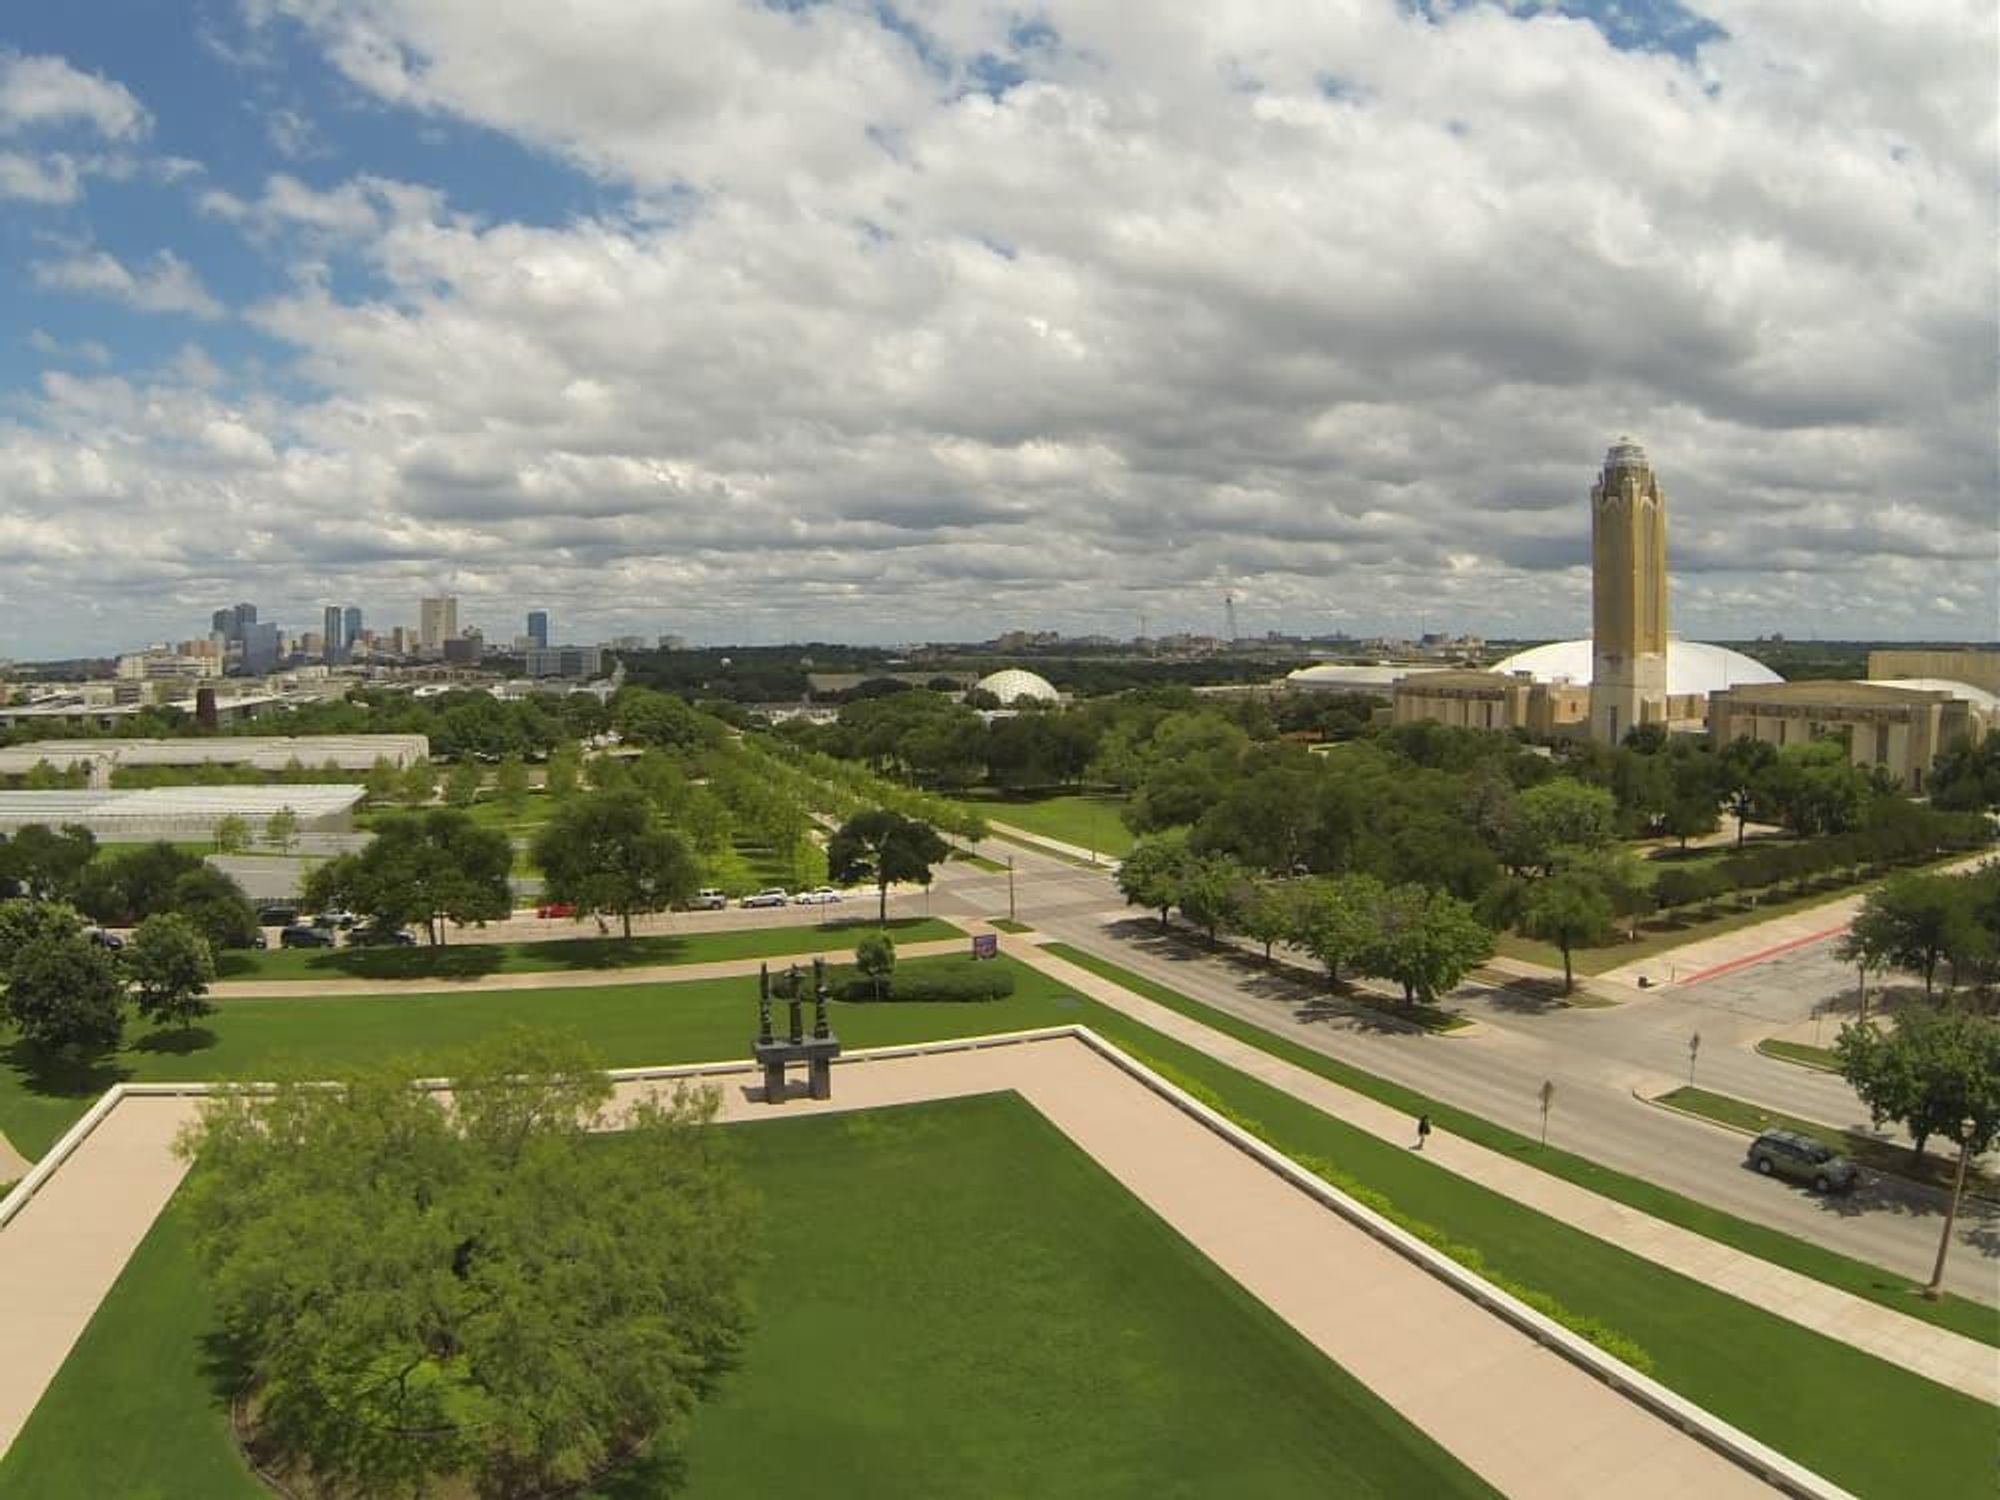 Fort Worth Cultural District